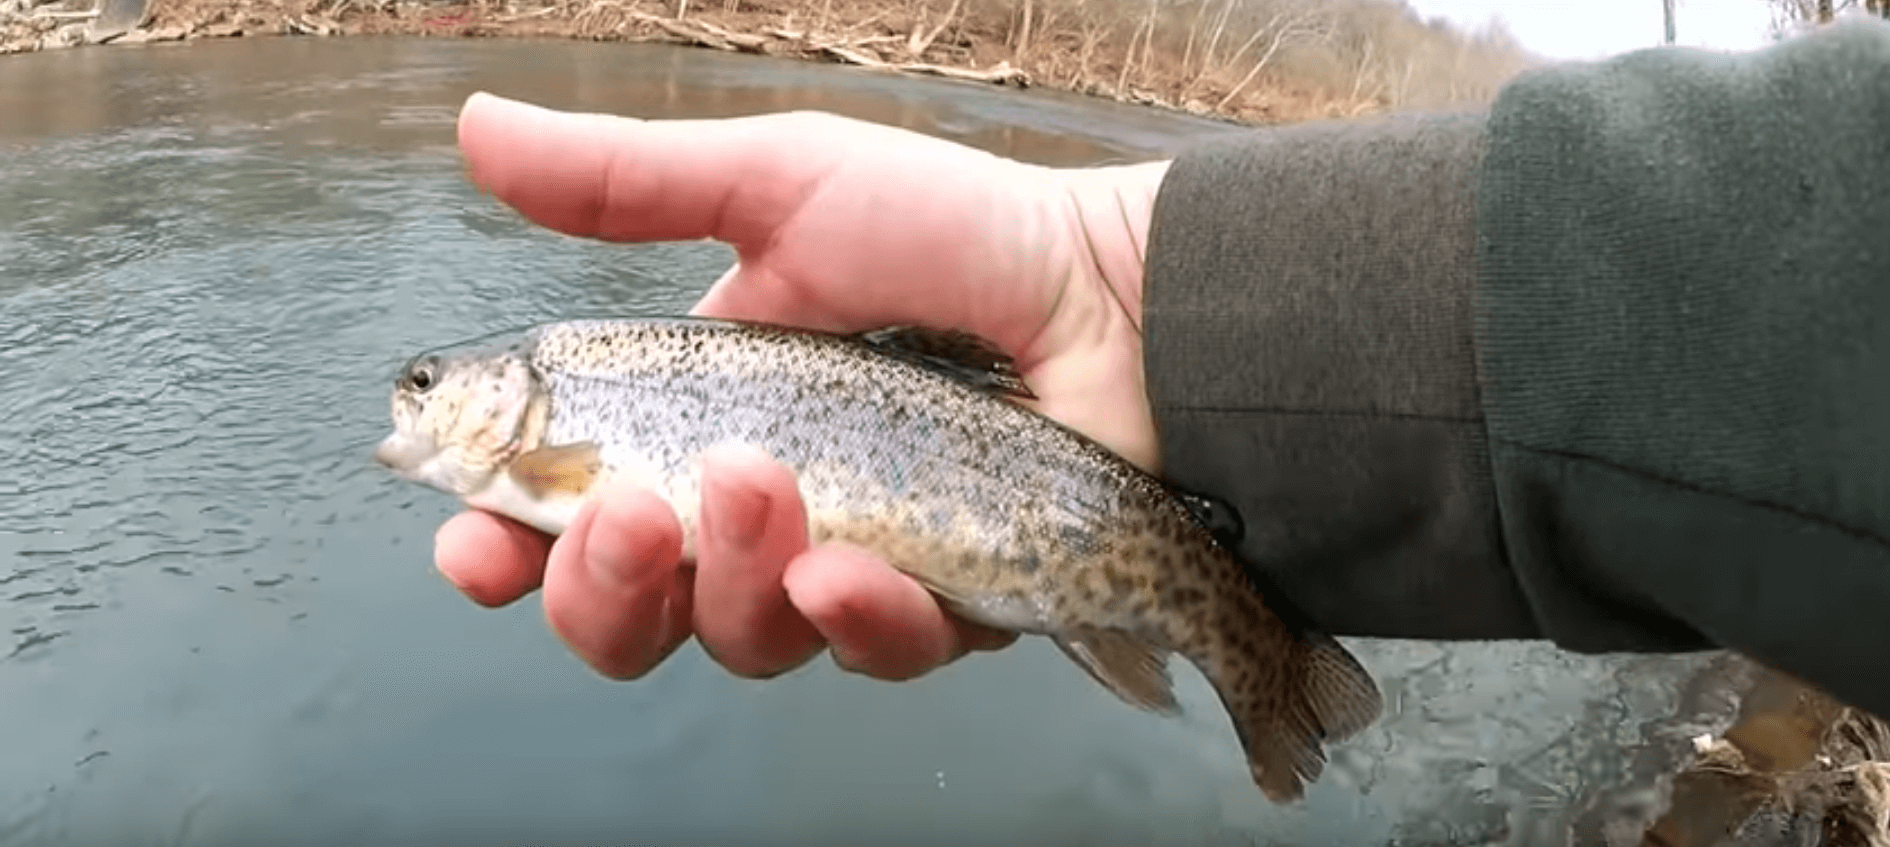 float rig vs bottom rig trout fishing with power eggs and gulp worms - Realistic Fishing